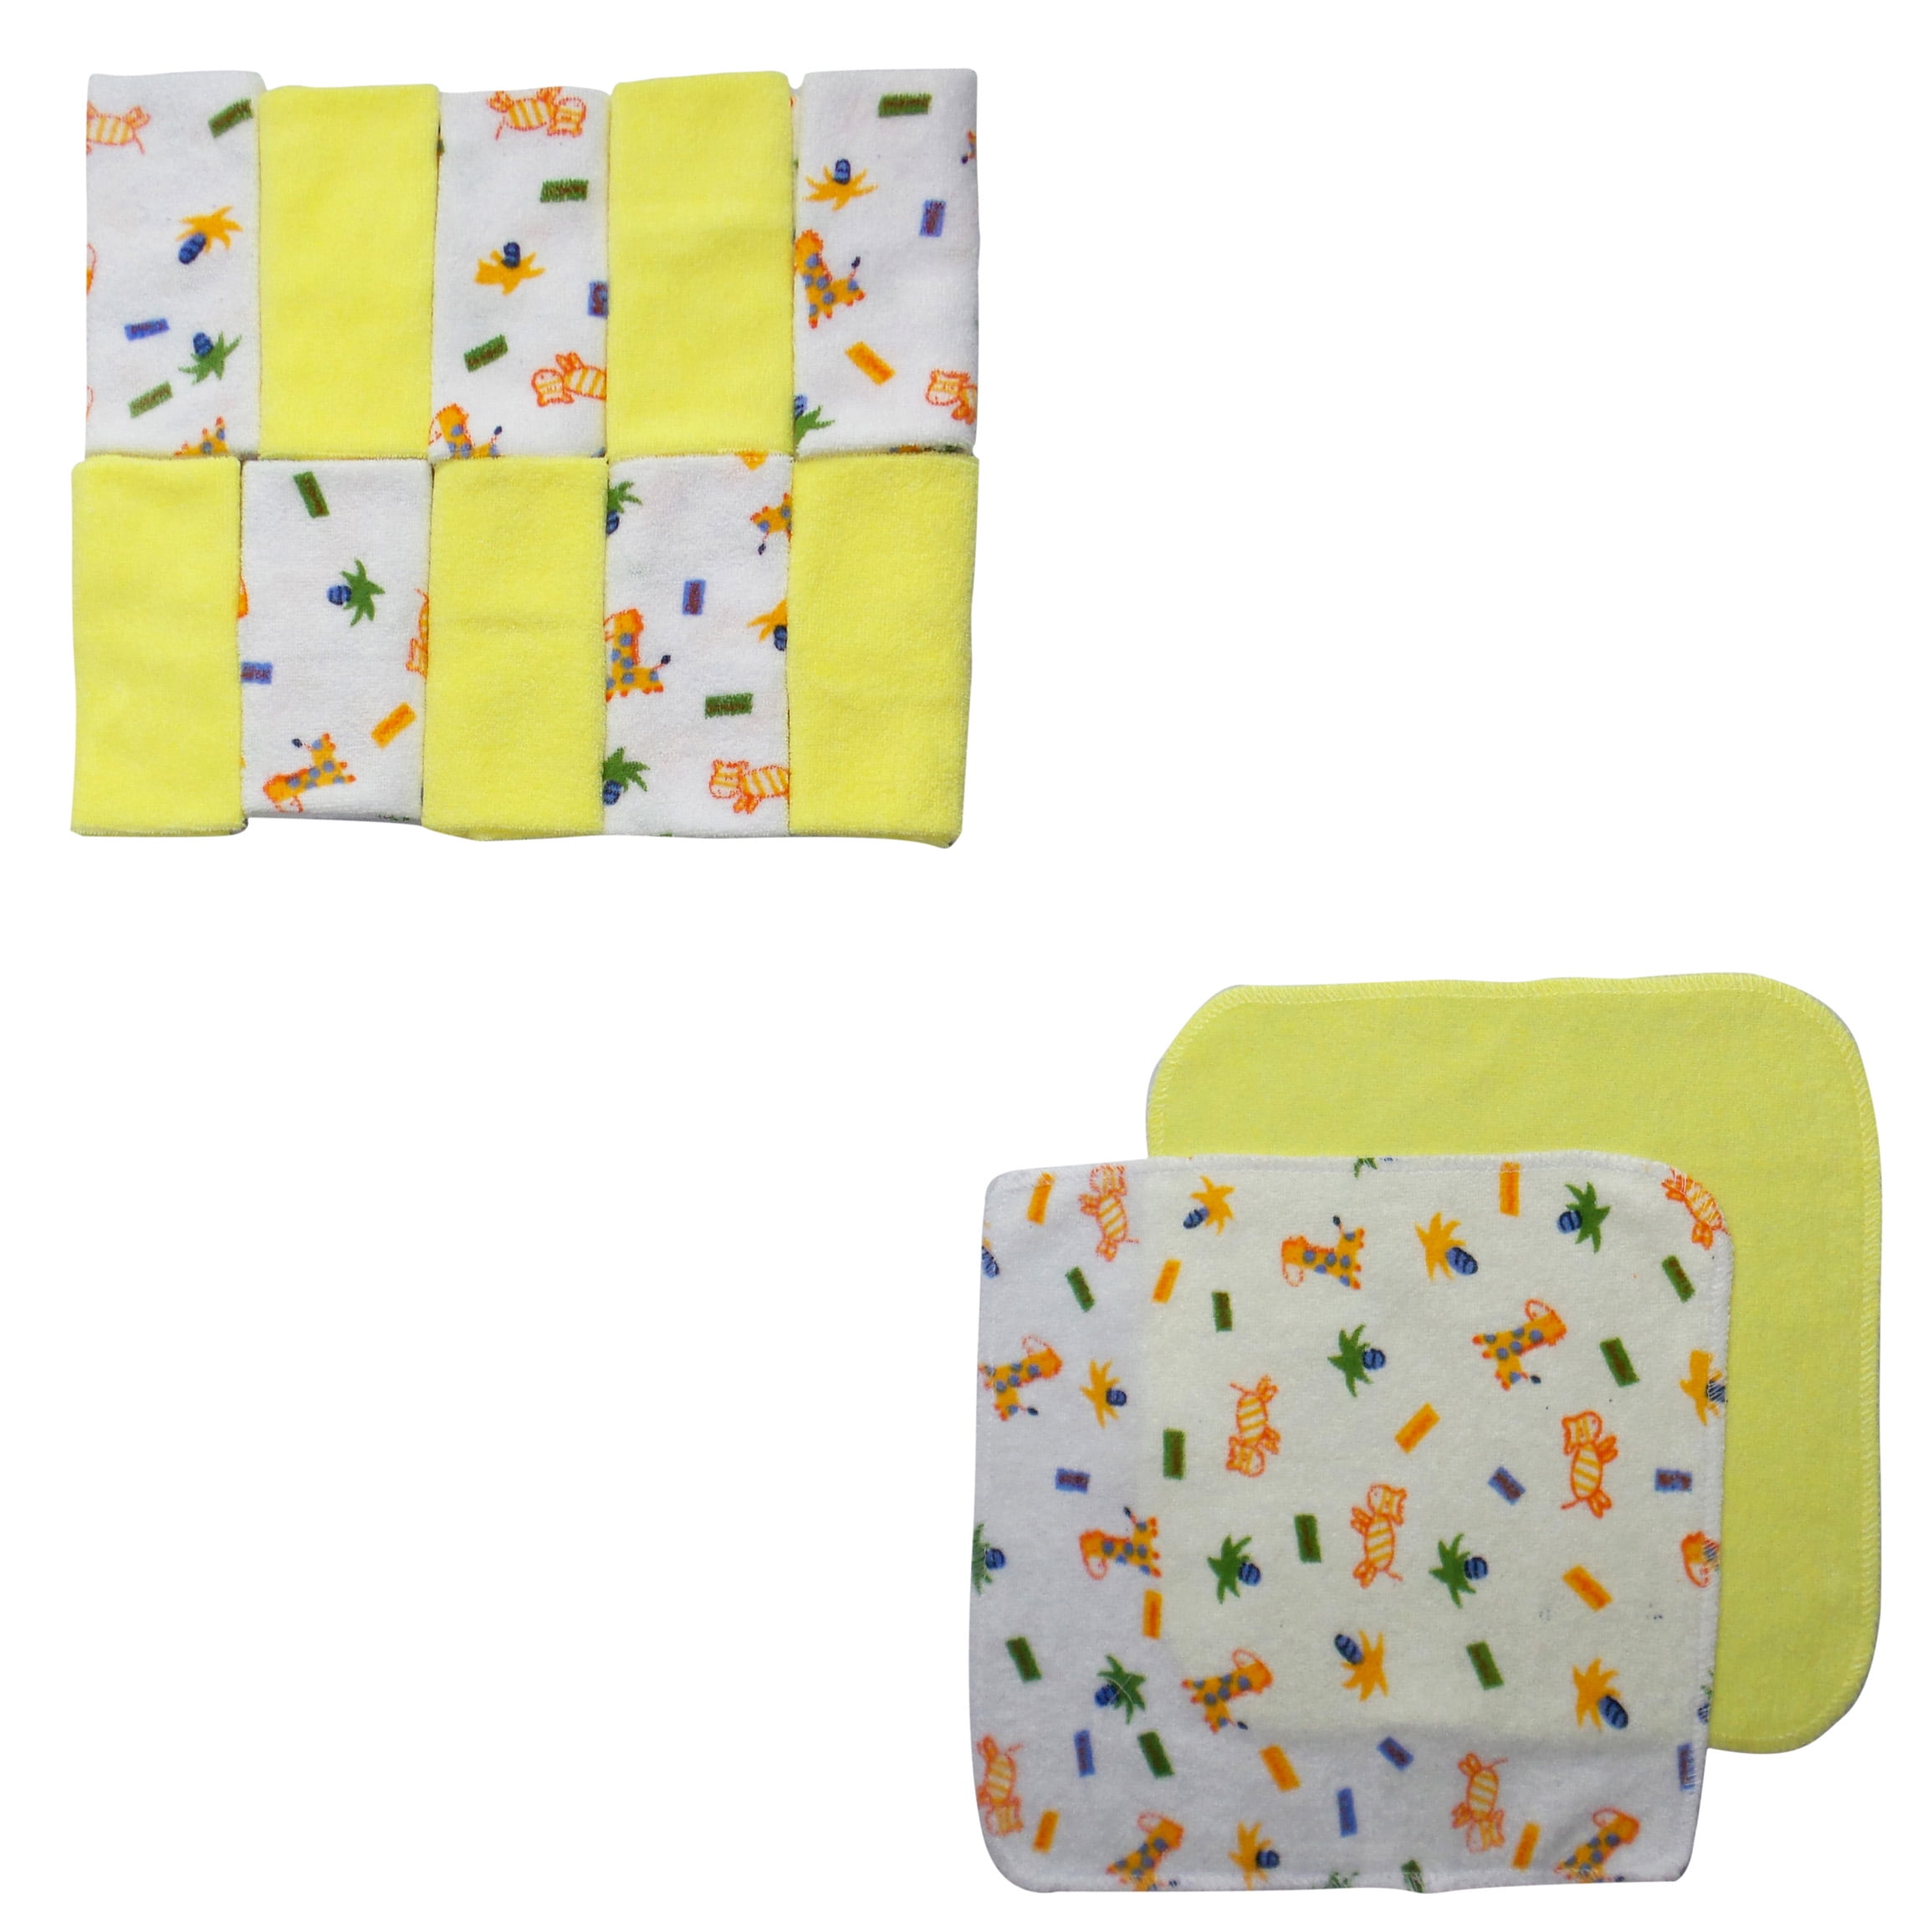 023-3-packs Wash Cloth Set, Yellow With Assorted Prints - 12 Piece Pack